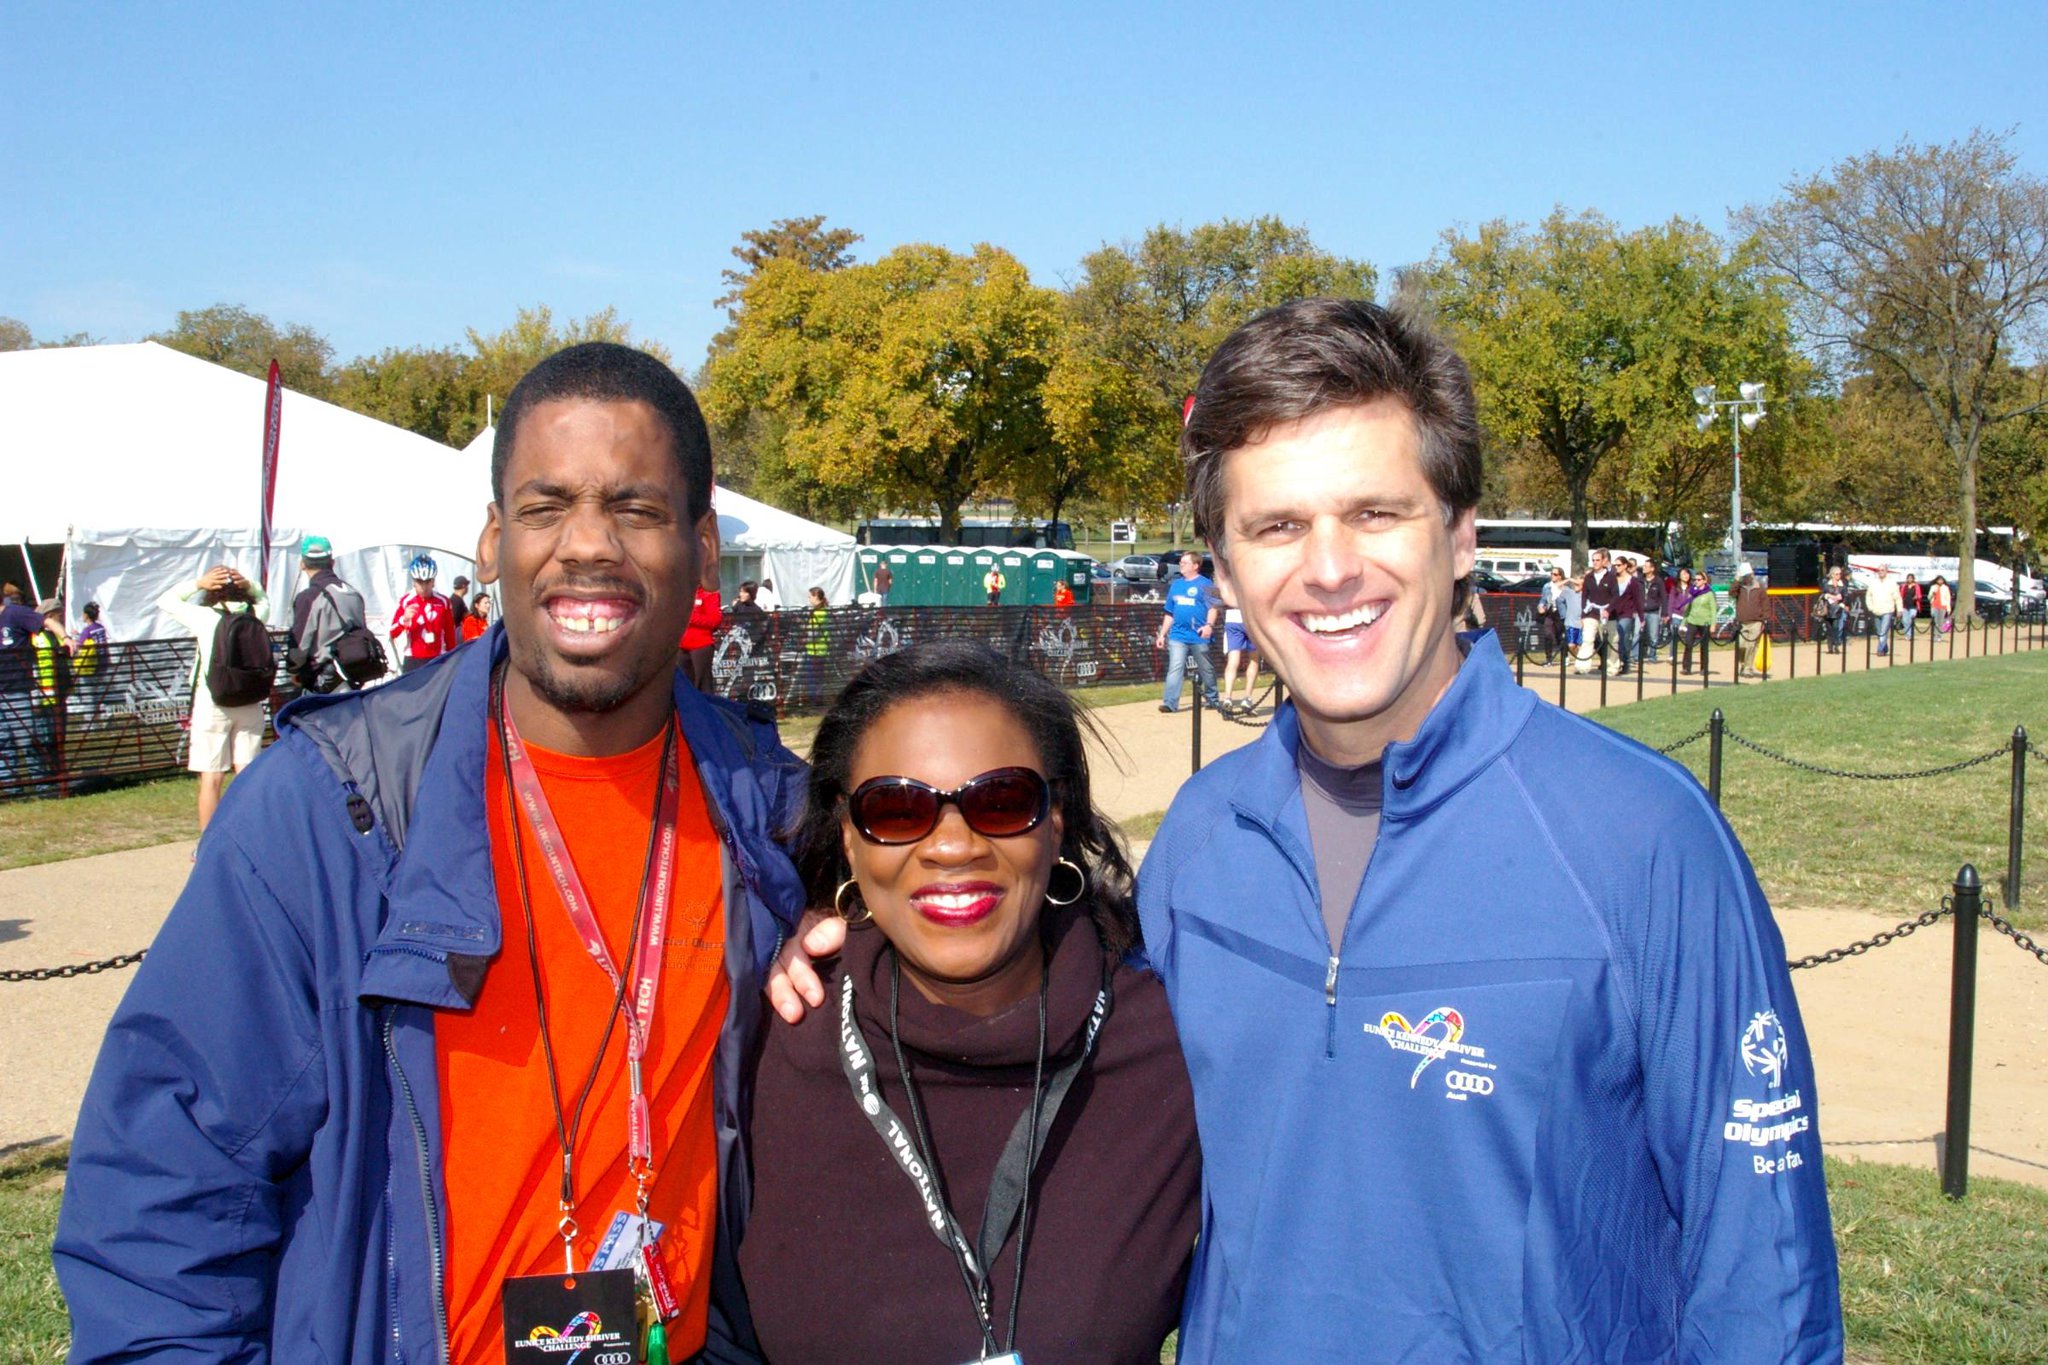 Terrence Baker, Tim Shriver and Wendy